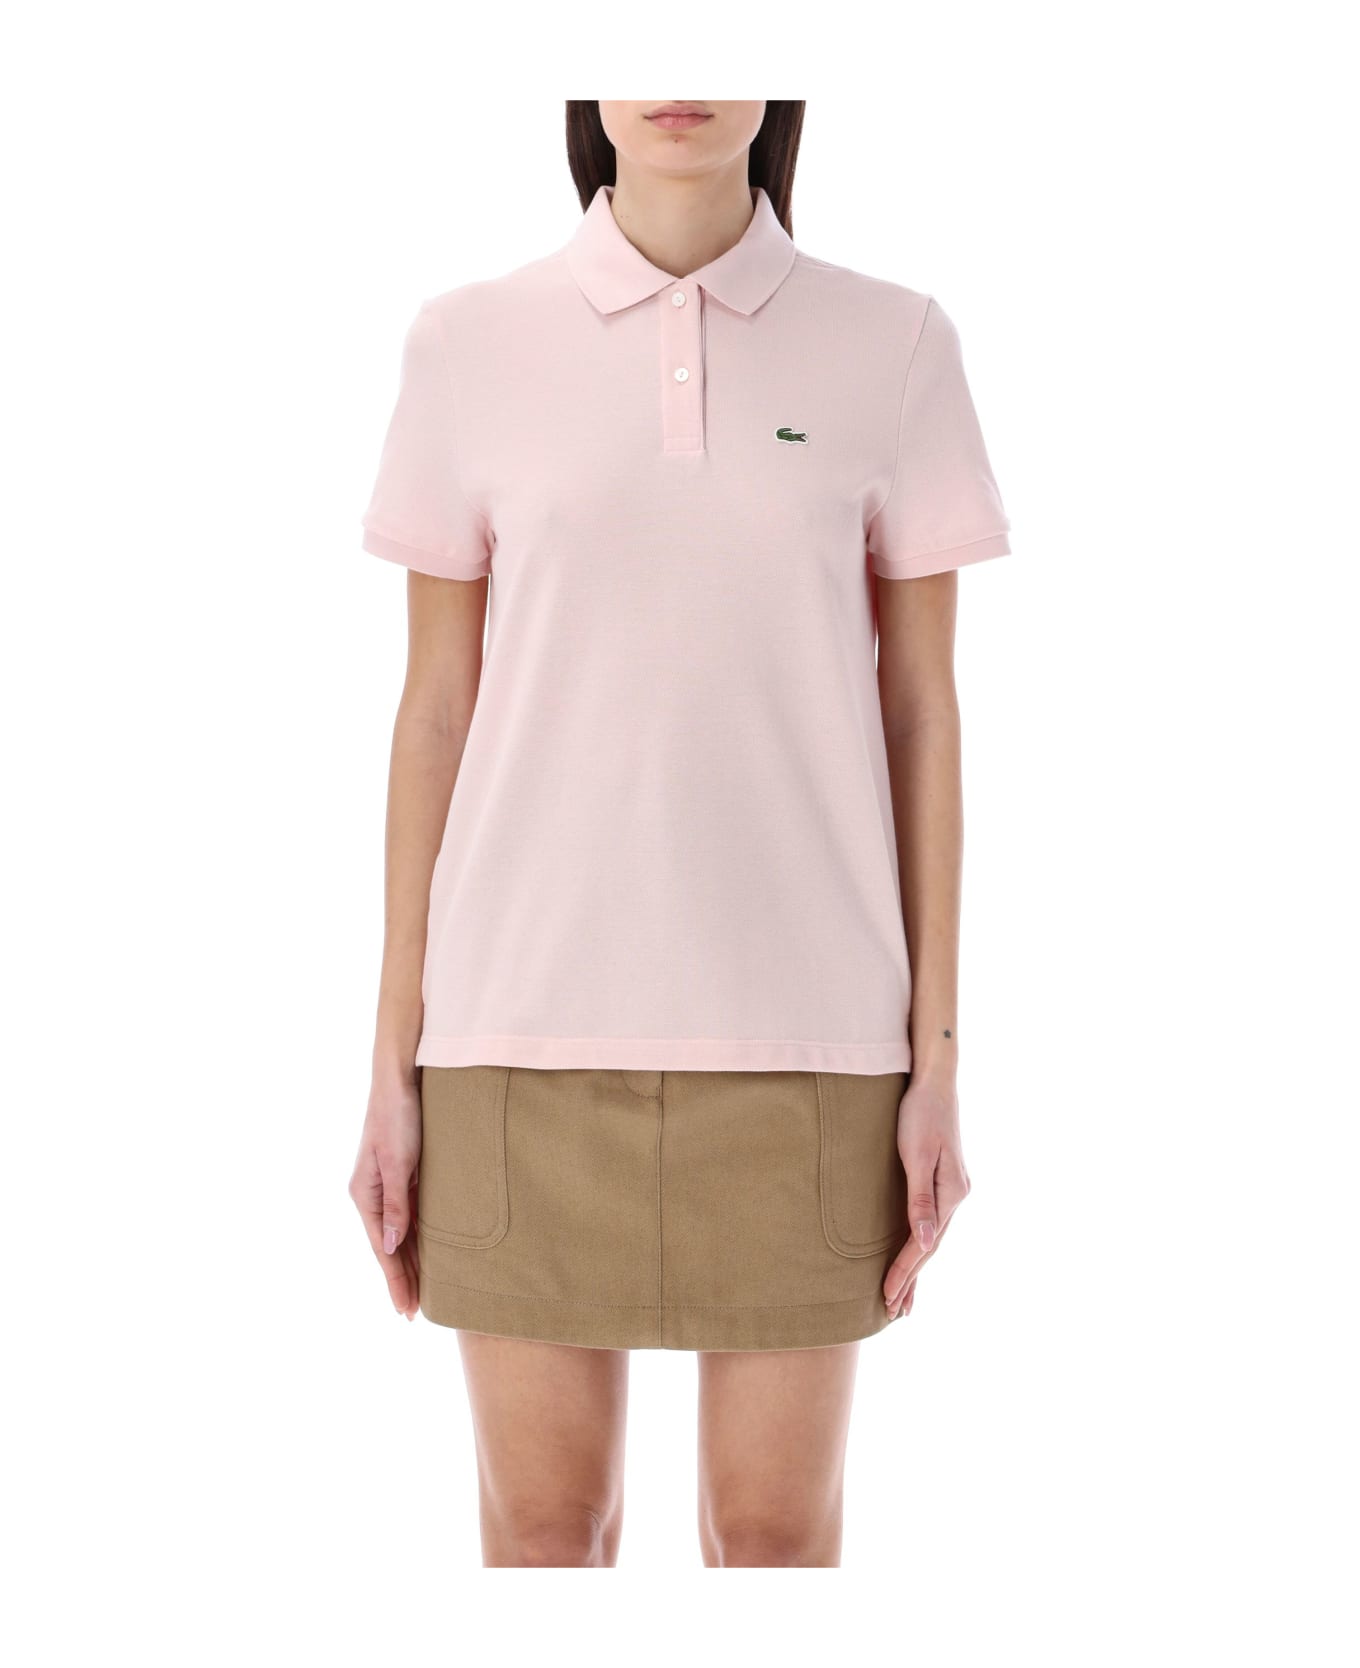 Lacoste Classic Polo Shirt - NIDUS PINK